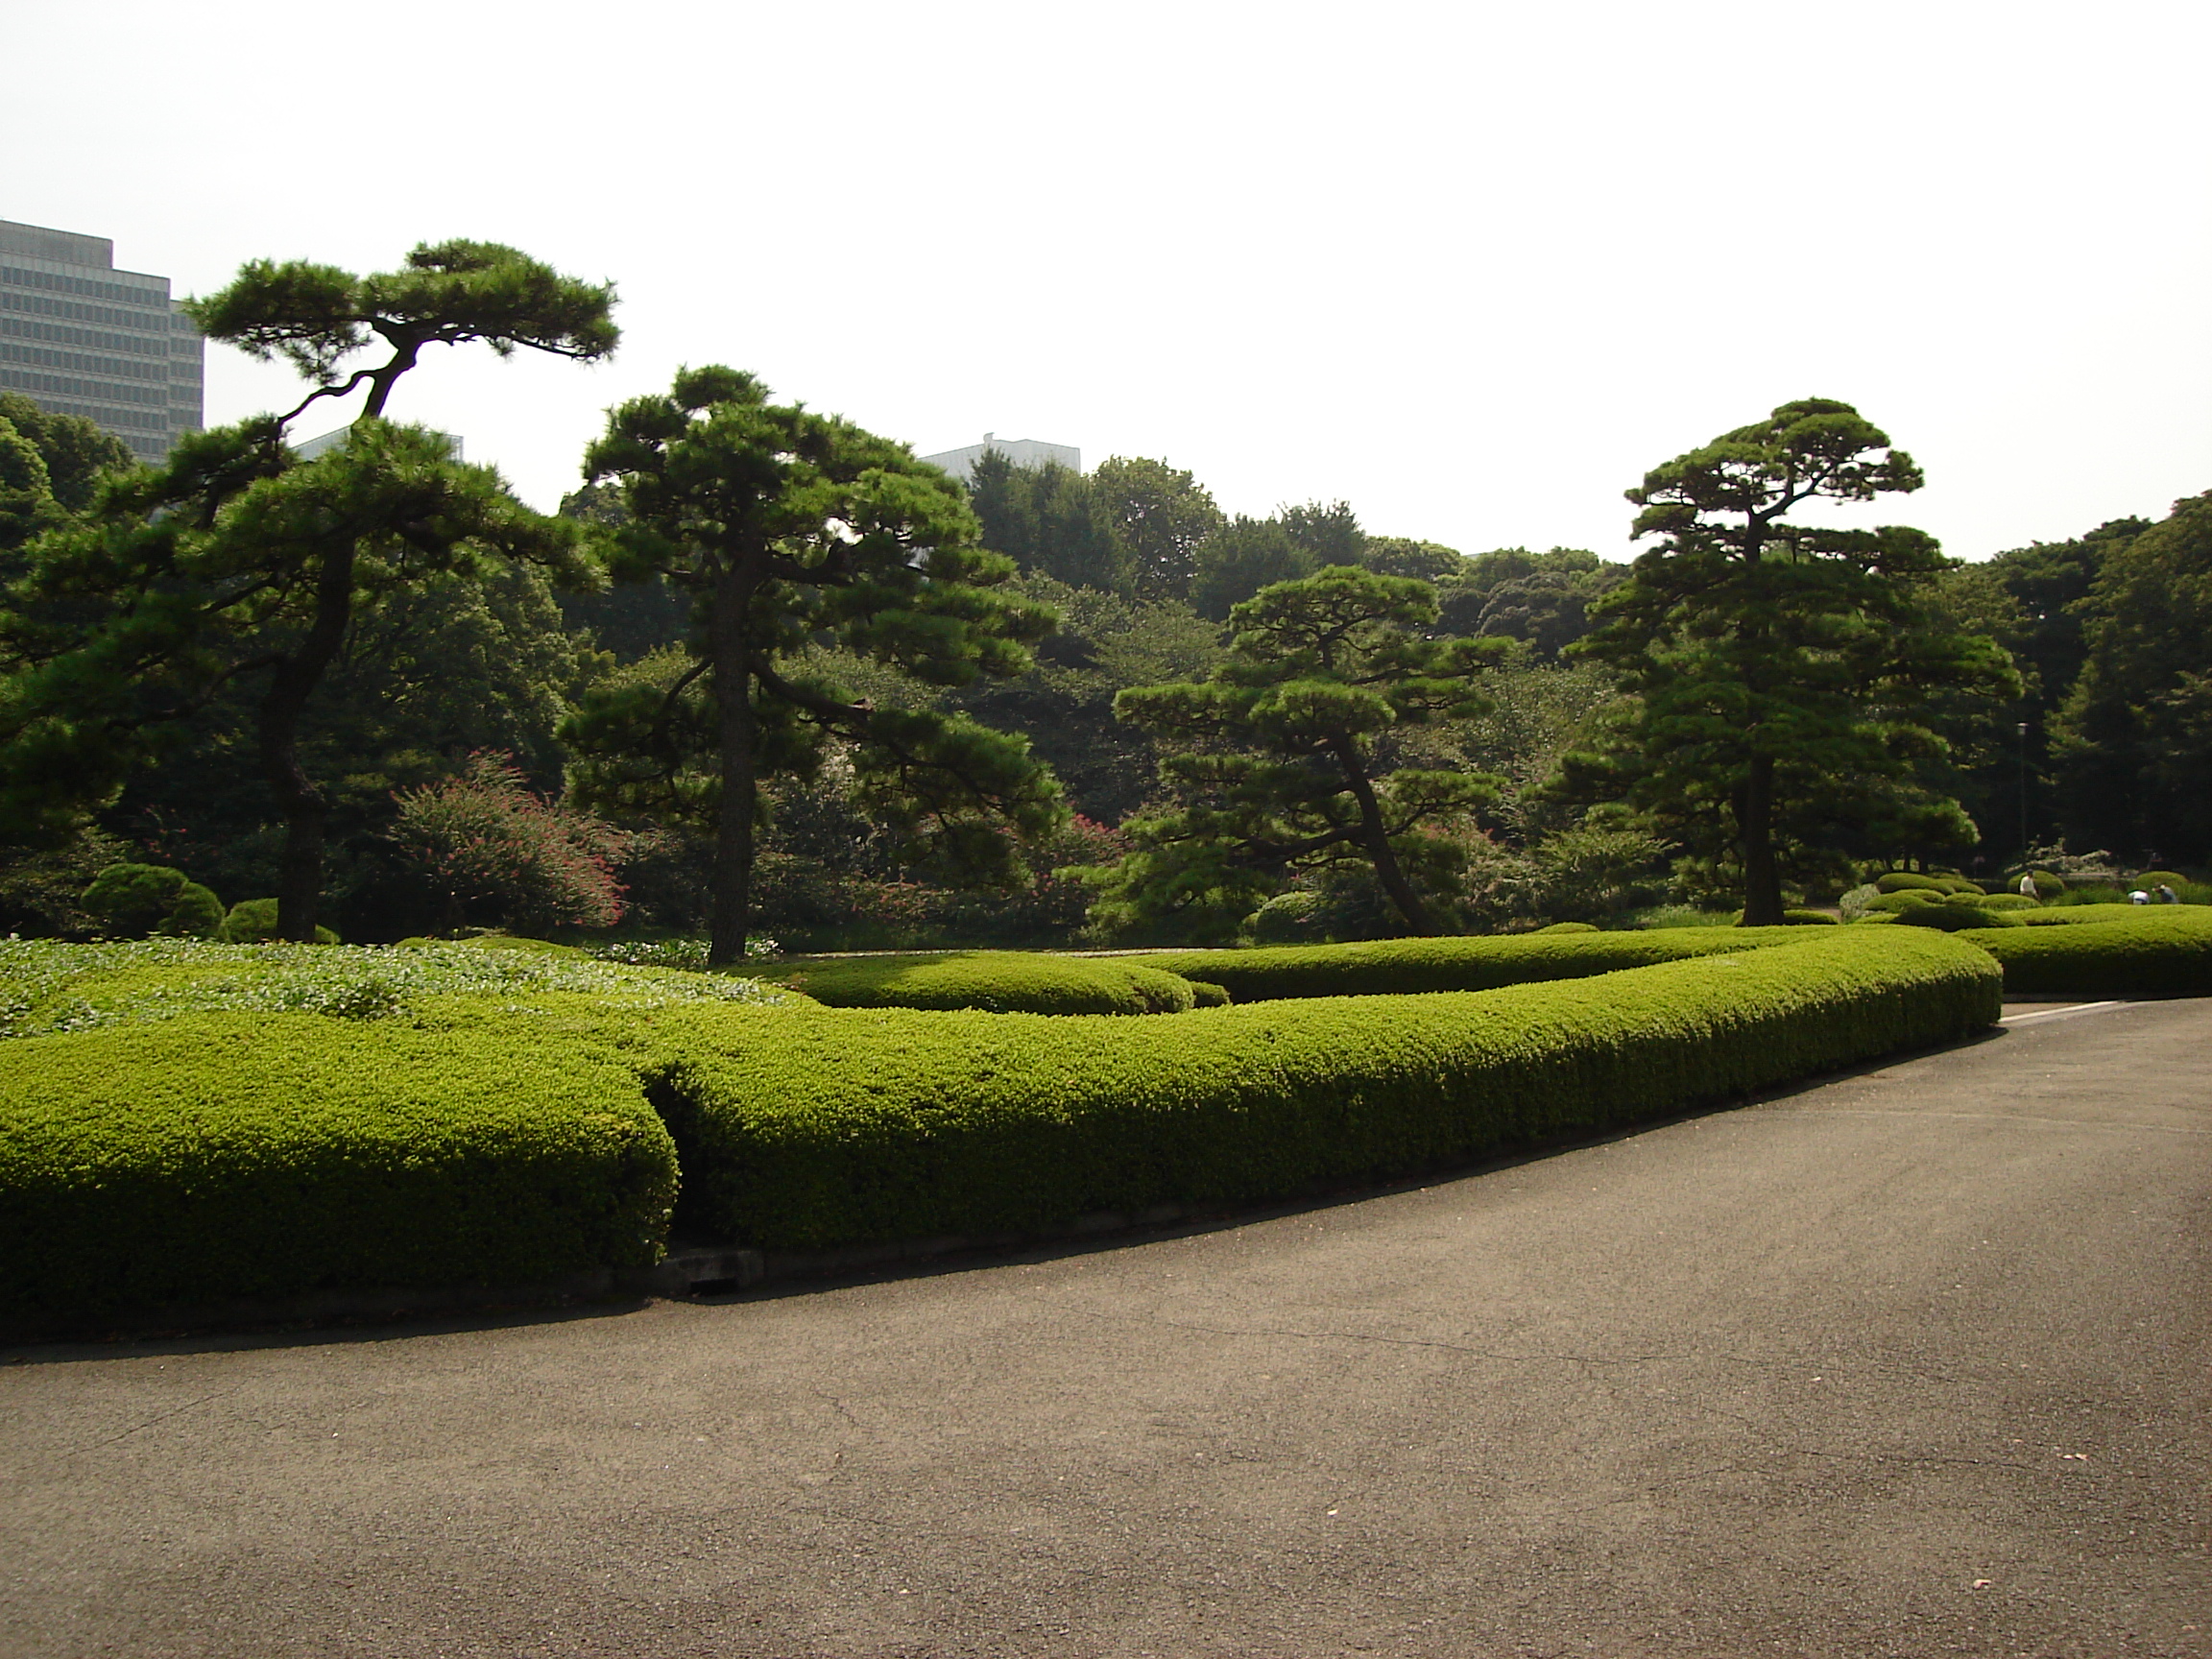 rounded hedges line the path